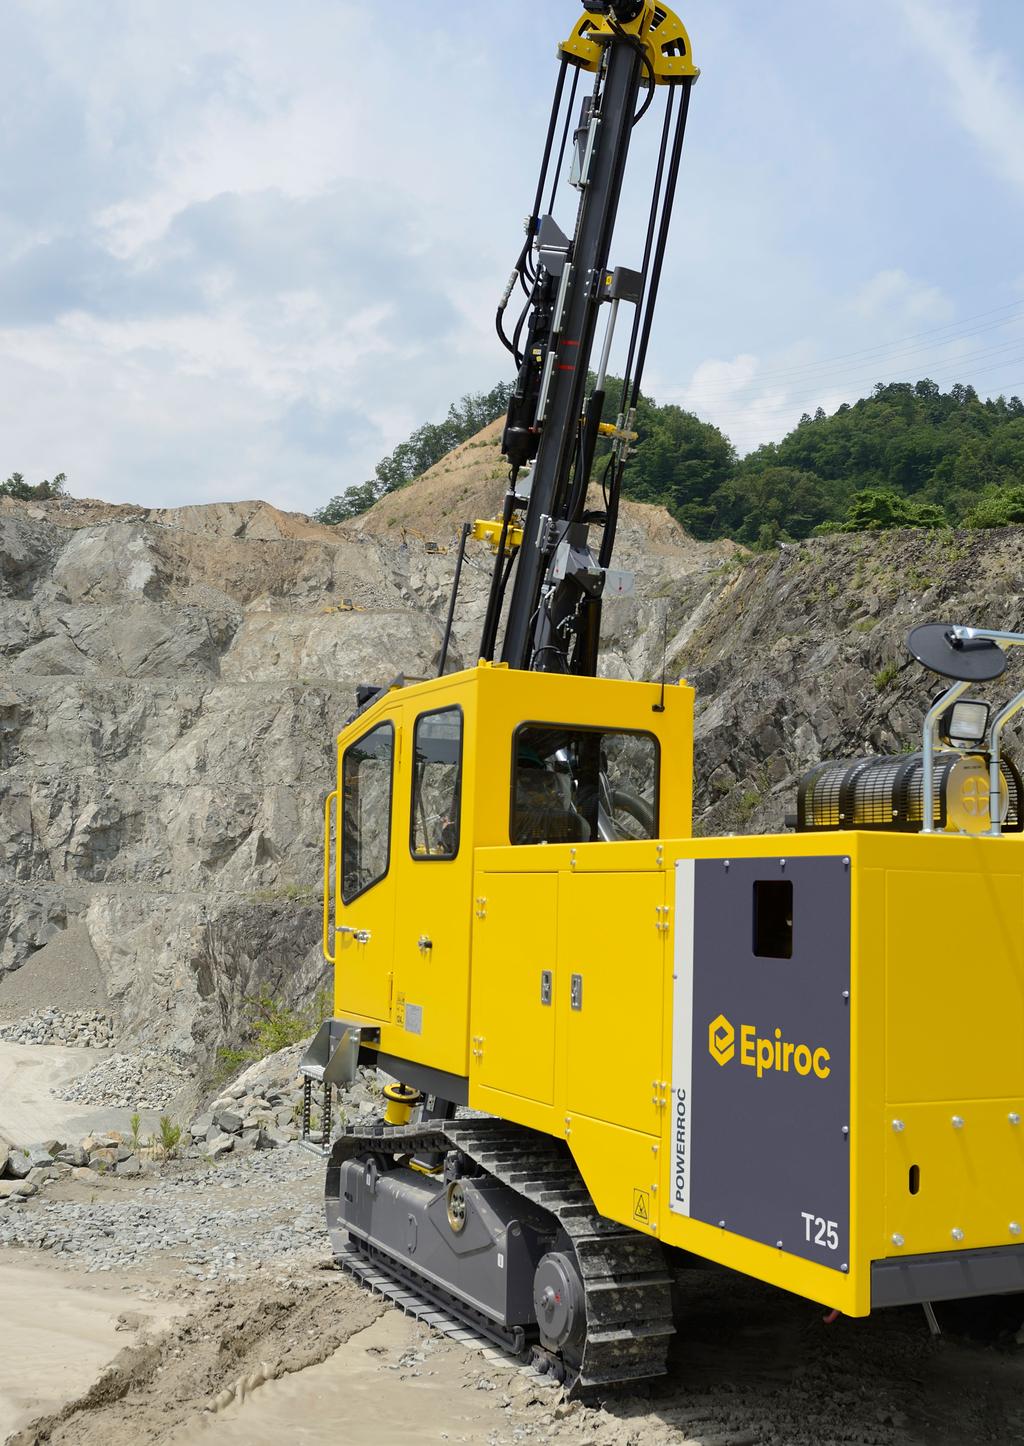 PowerROC T25 DC Surface drill rig for drill site construction, civil